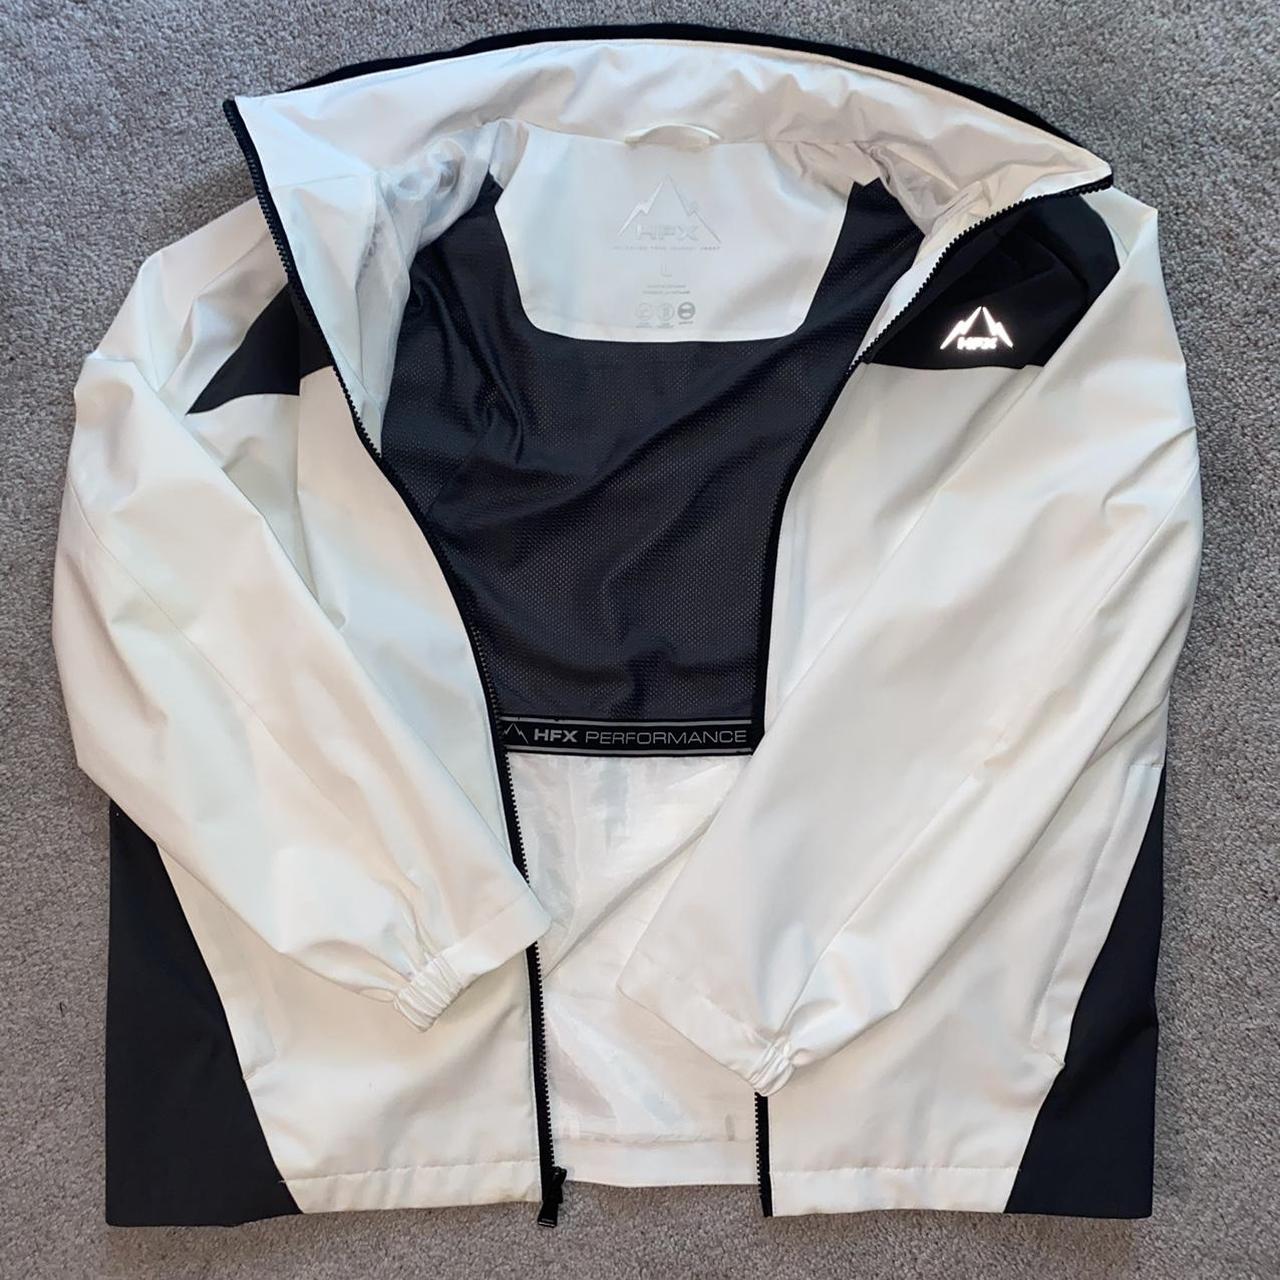 HFX Men's White and Grey Jacket (2)